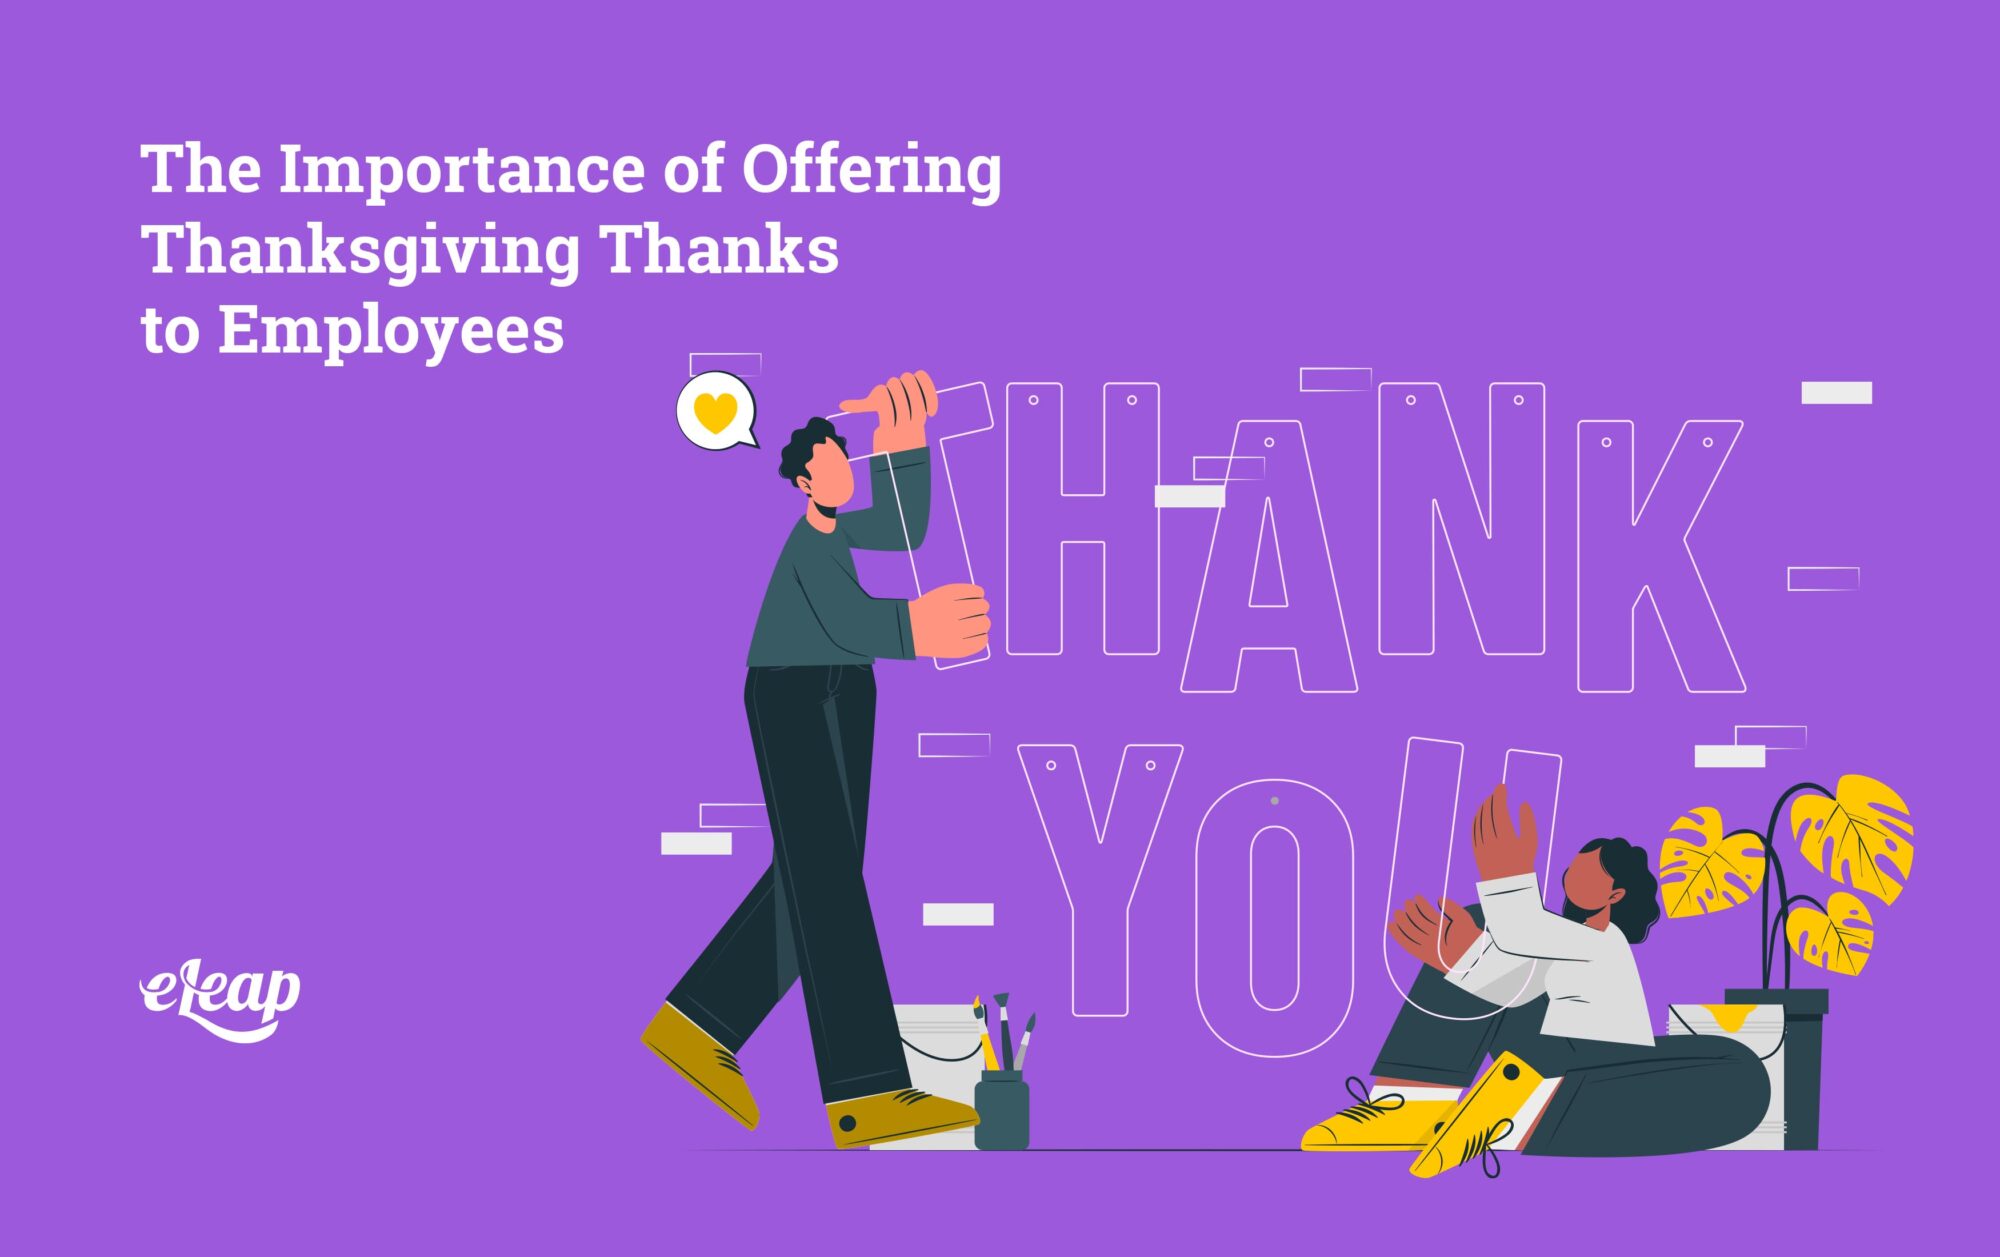 The Importance of Offering Thanksgiving Thanks to Employees